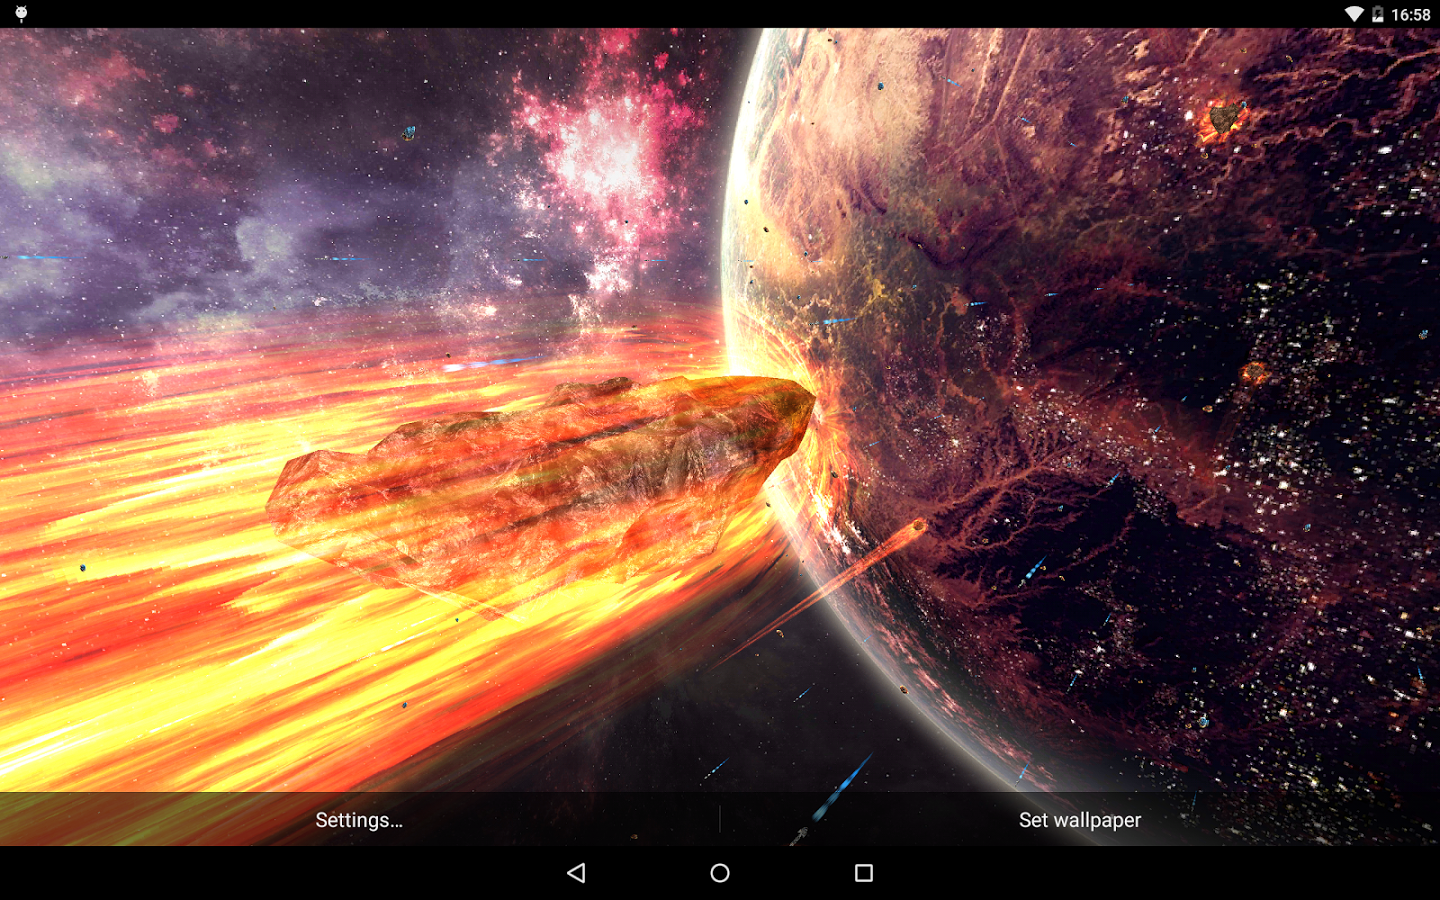 armageddon wallpaper,outer space,astronomical object,universe,space,geological phenomenon